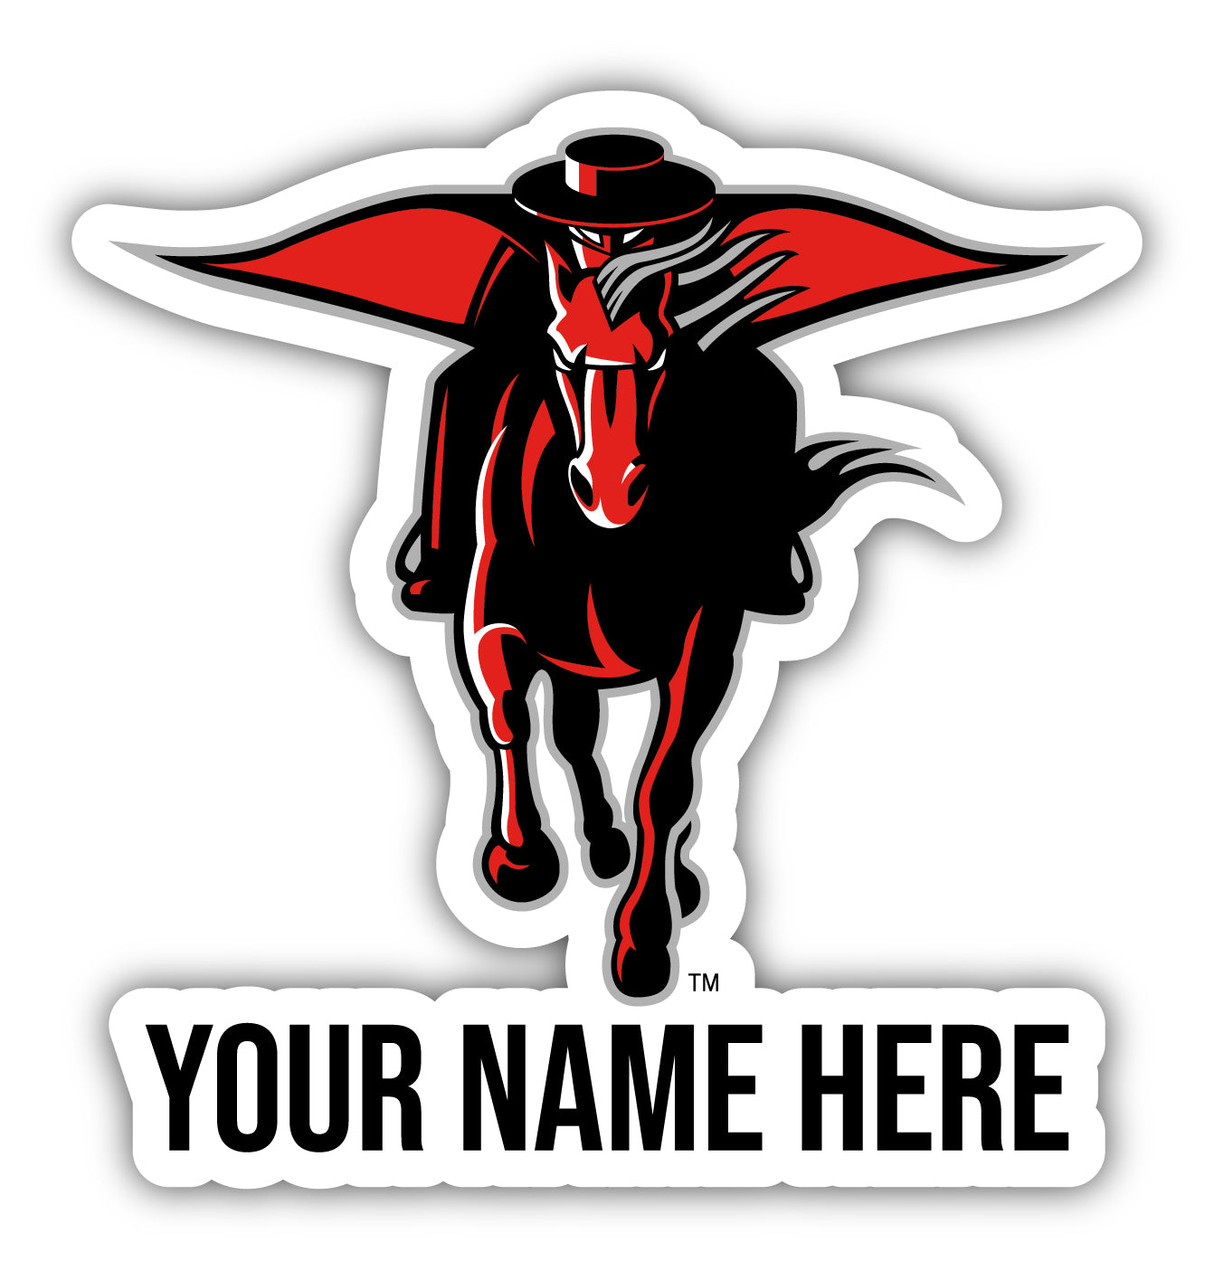 Personalized Customizable Texas Tech Red Raiders Vinyl Decal Sticker Custom Name